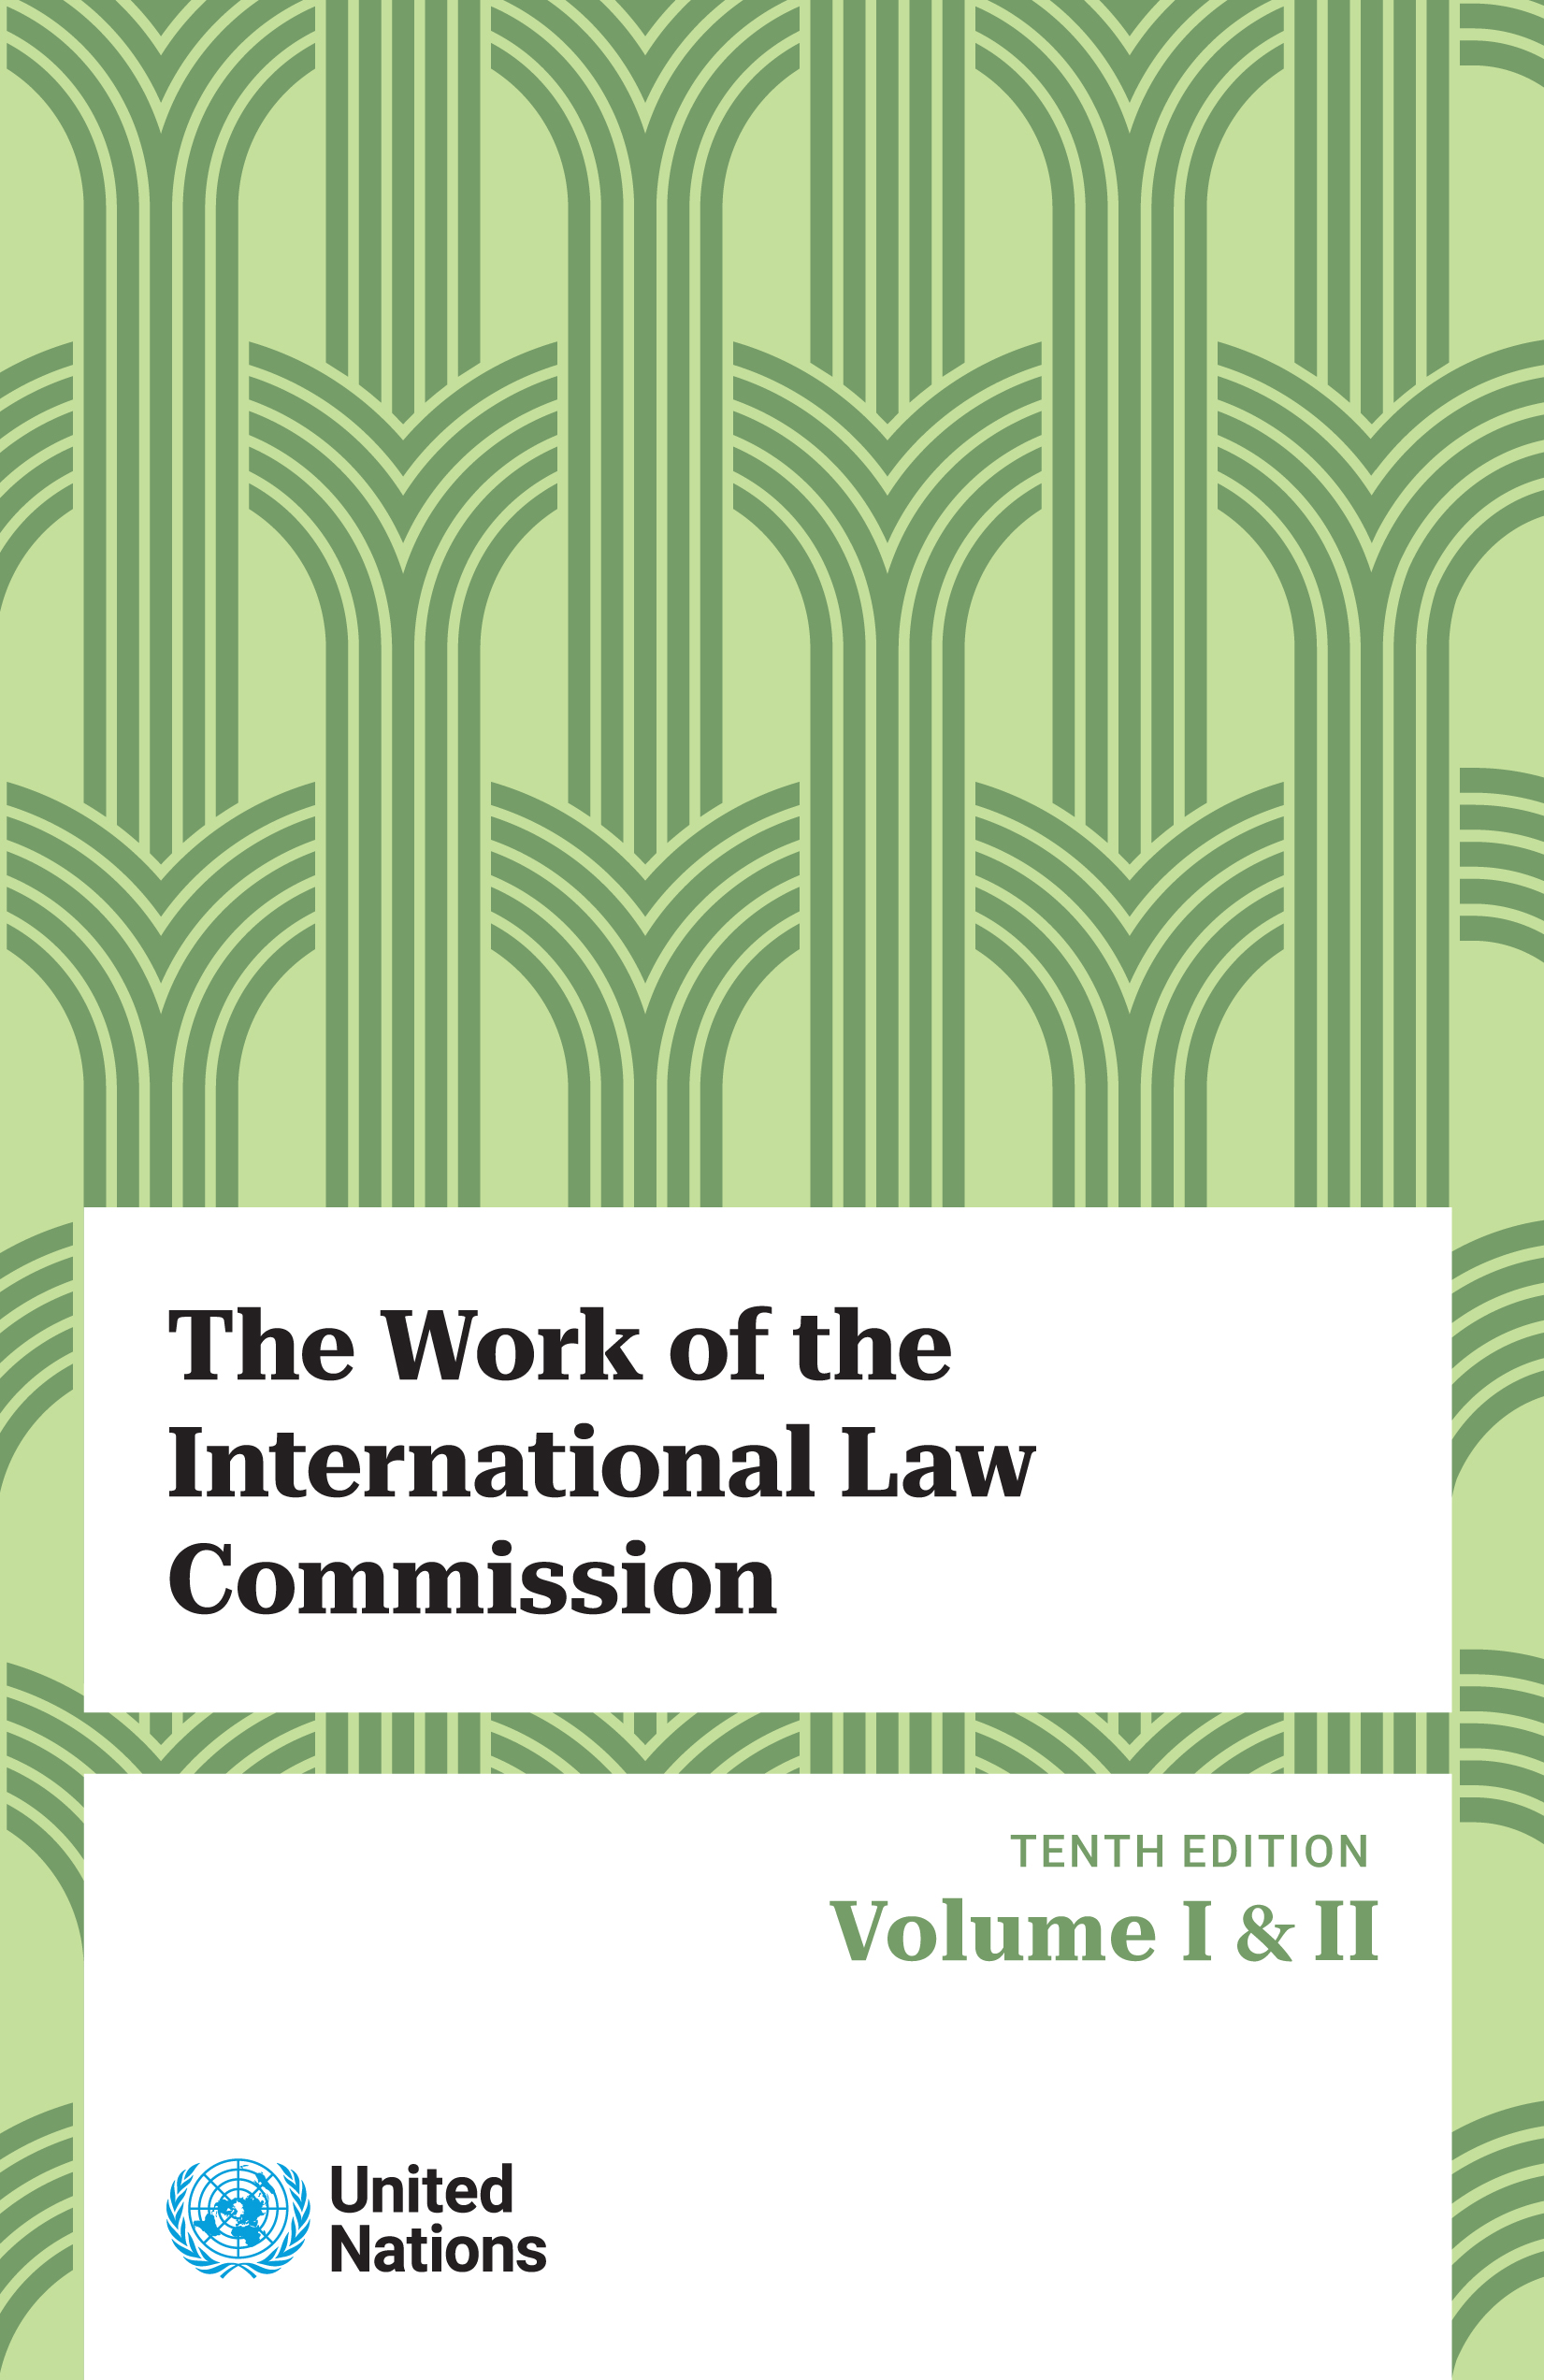 The Work of the International Law Commission